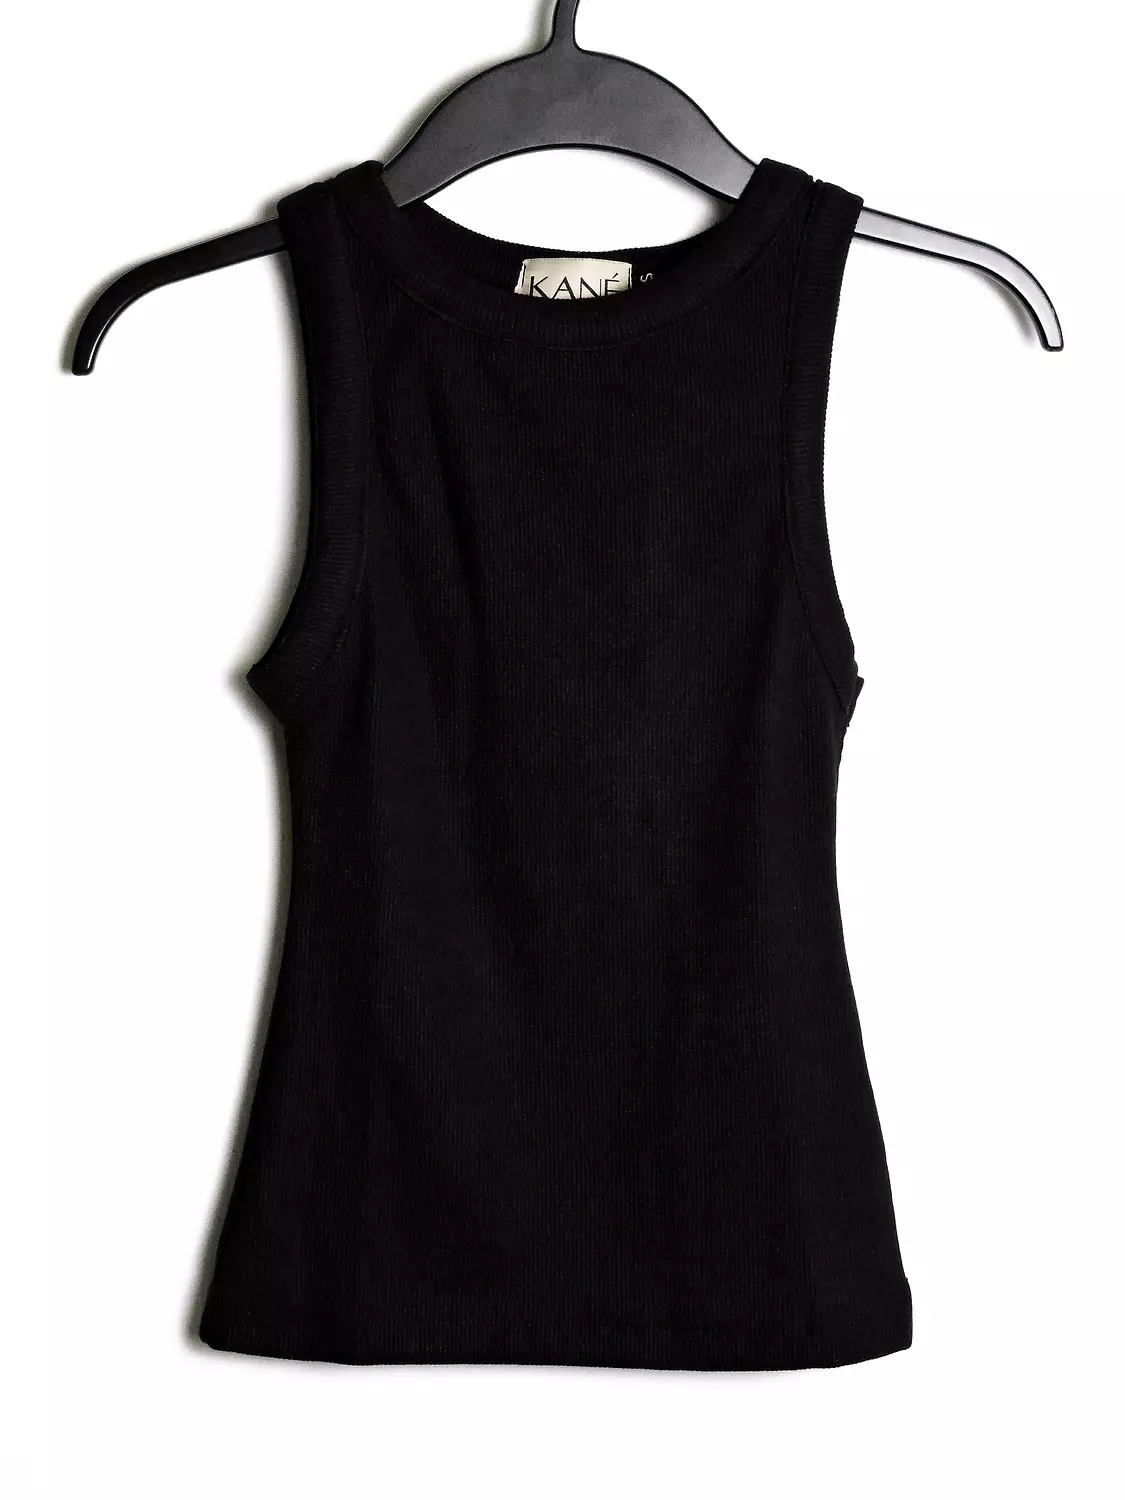 The Black Tank Top hover image